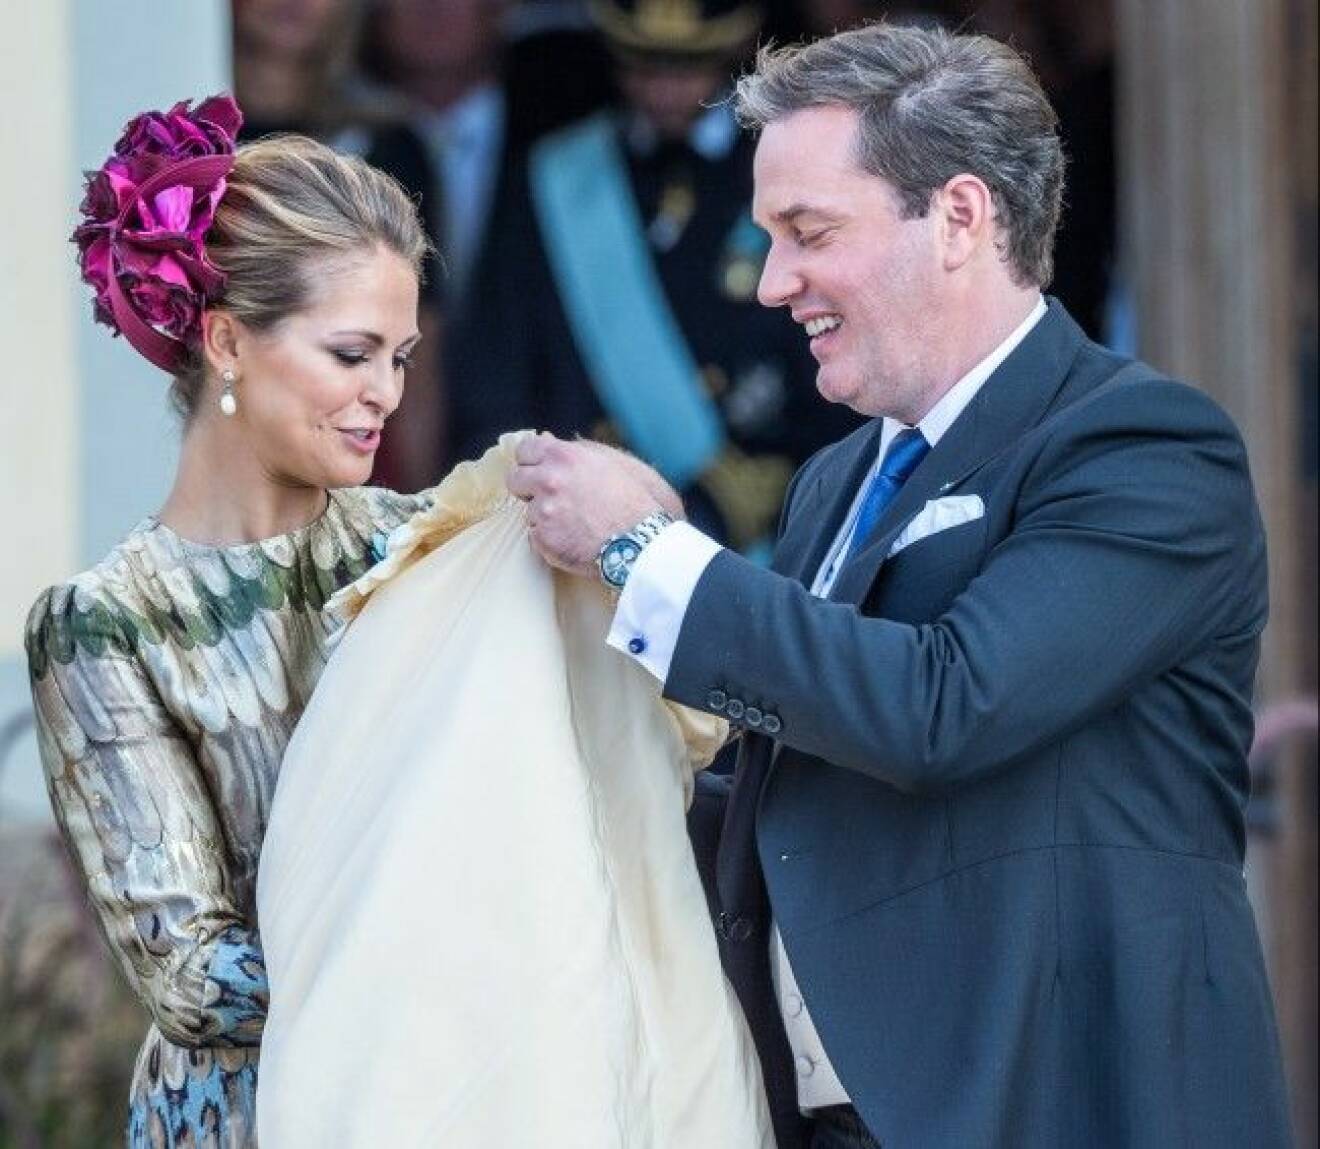 2015-10-11, Drottningholm Palace Church, Sweden In pic: Princess Madeleine, Christopher O'Neill, Prince Nicolas outside the church. Today was the baptism of Princess Madeleine and Christopher O'Neill's son - Prince Nicolas at the Drottningholm Palace Church. From the swedish royal family was also King Carl Gustaf, Queen Silvia, Crown Princess Victoria, Prince Daniel, Estelle, Prince Carl Philip and Princess Sofia attended. After the naming ceremony that began at 12:00 gave the royal couple a reception inside the Drottningholm Palace. Pictures of this event. All Over Press